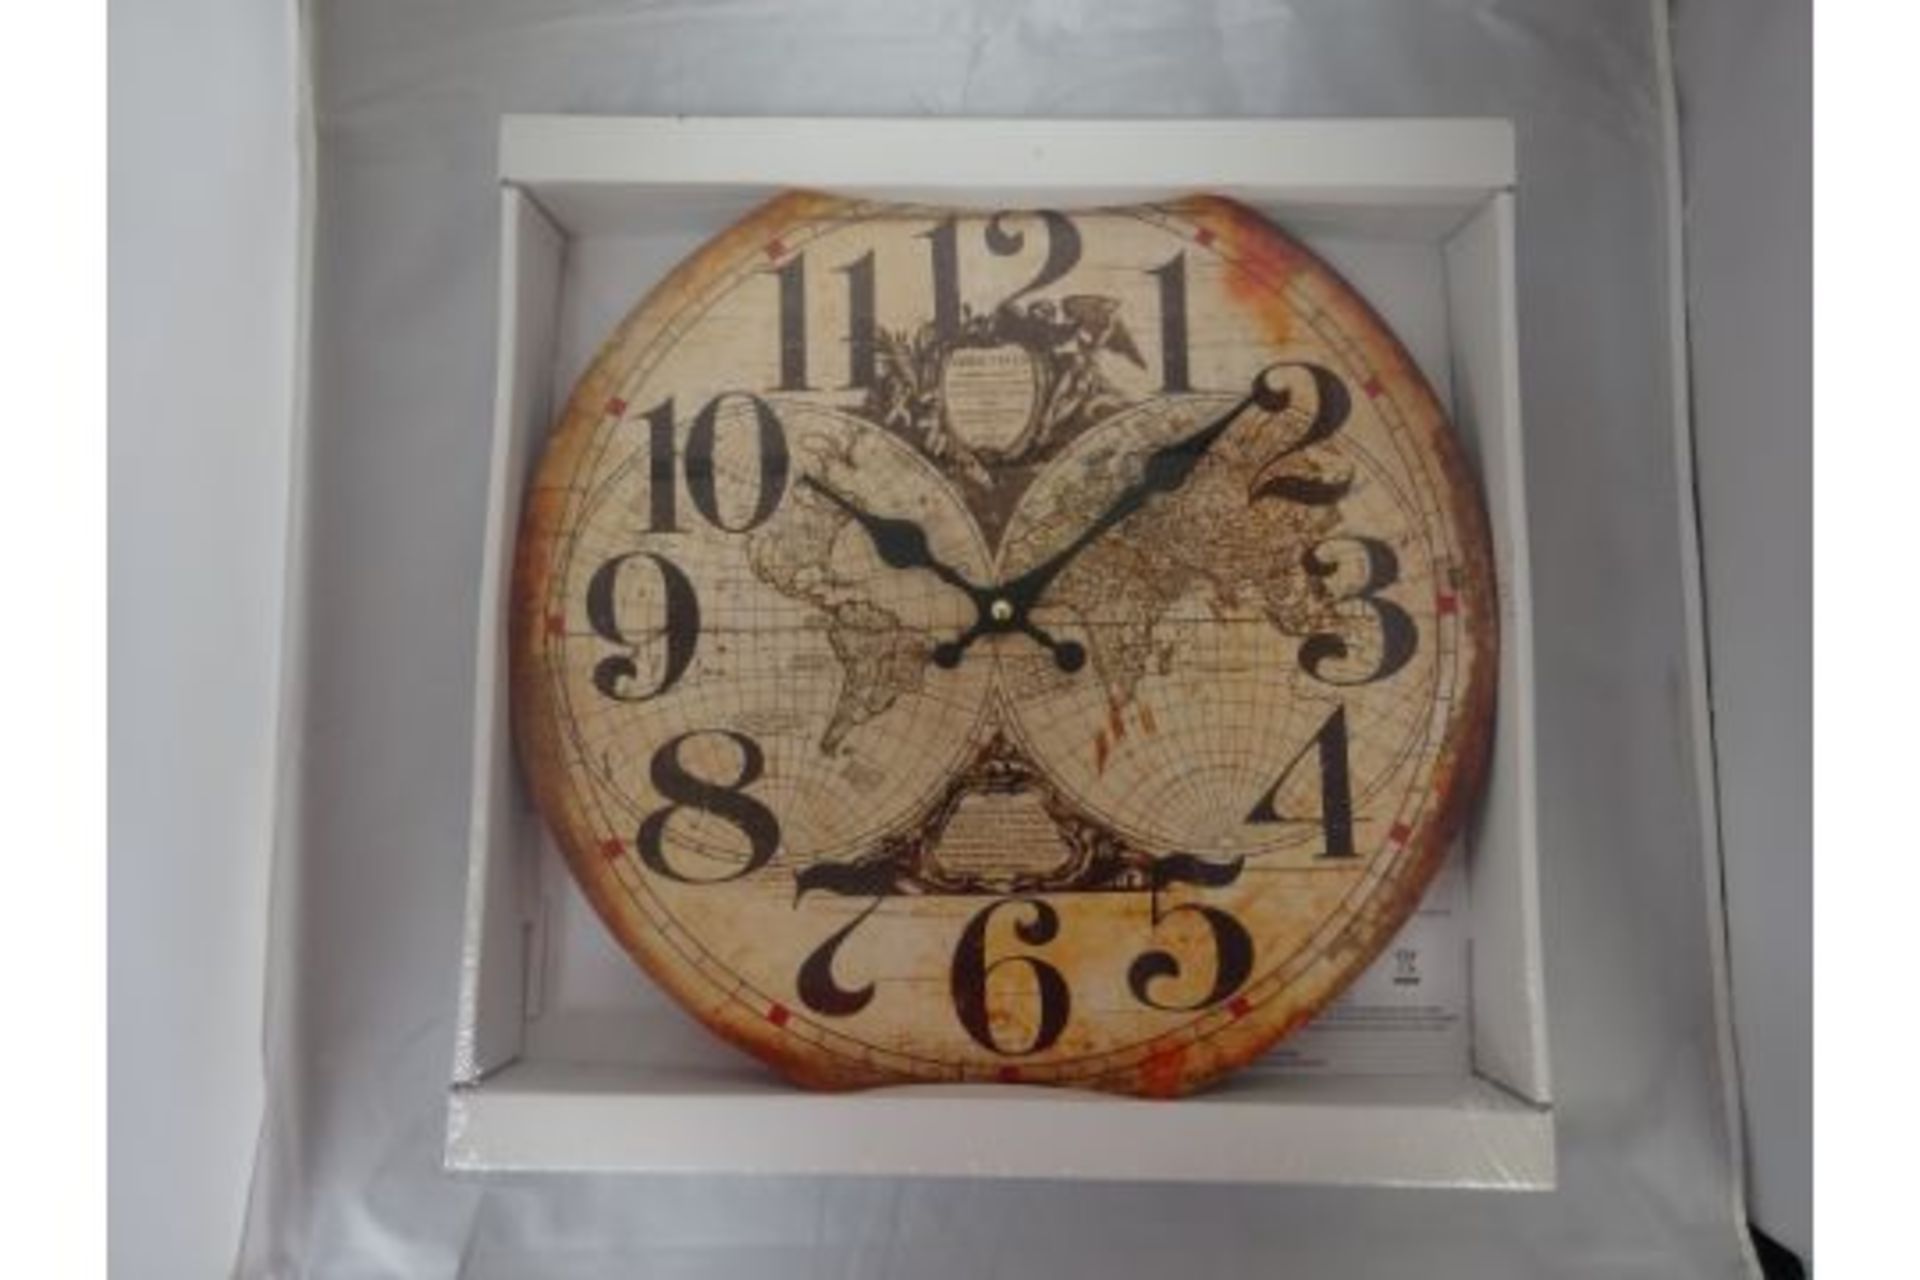 NEW OLD WORLD WALL CLOCK IN ORIGINAL PACKAGING - Image 2 of 2